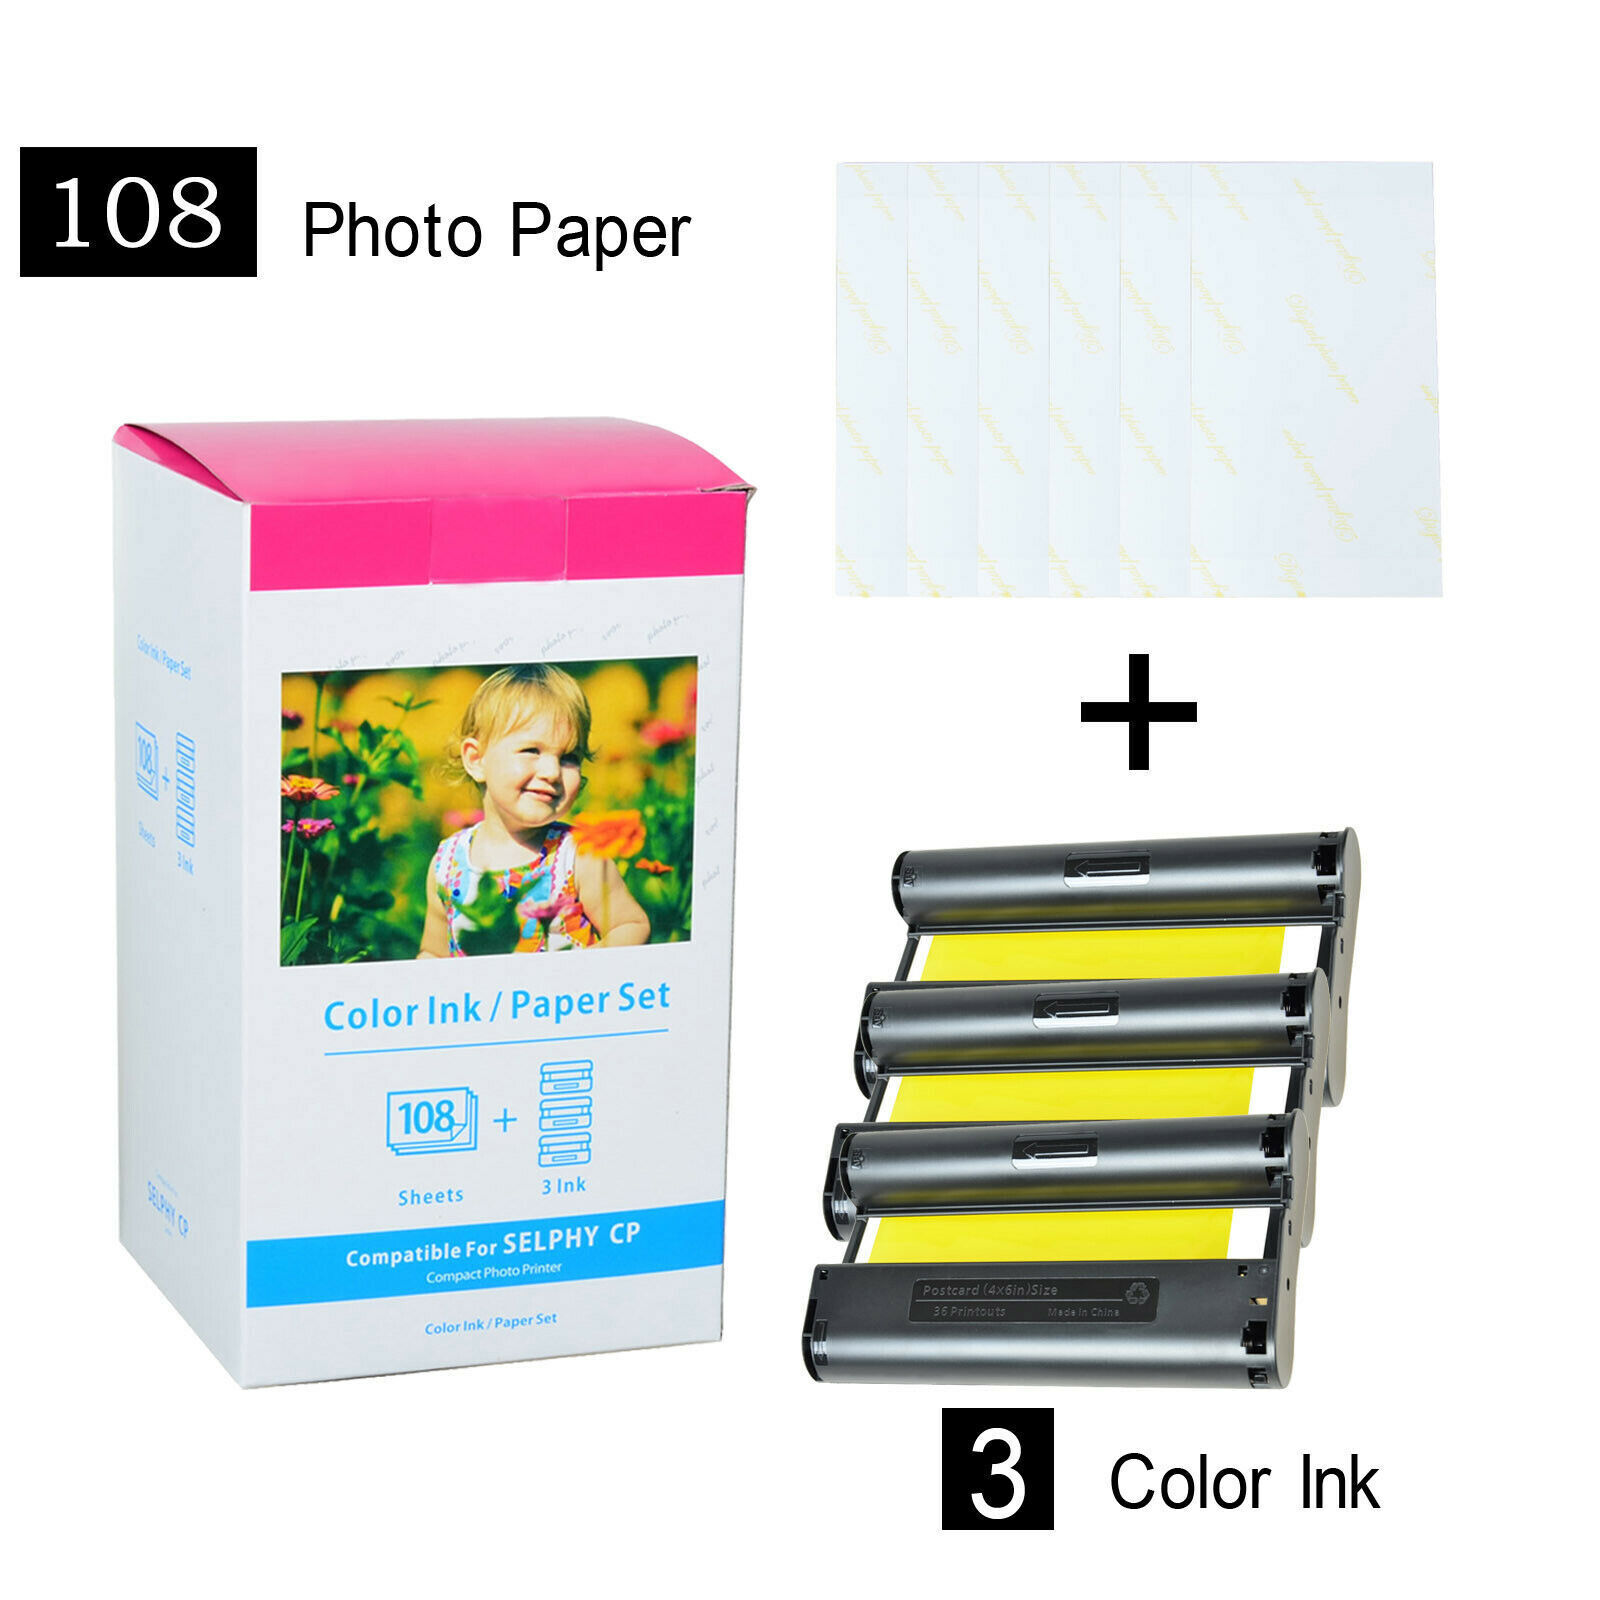 Canon KP-108IN Color Ink Paper Set 4x6 for Canon Selphy CP1300 CP1200 CP1500 Lot